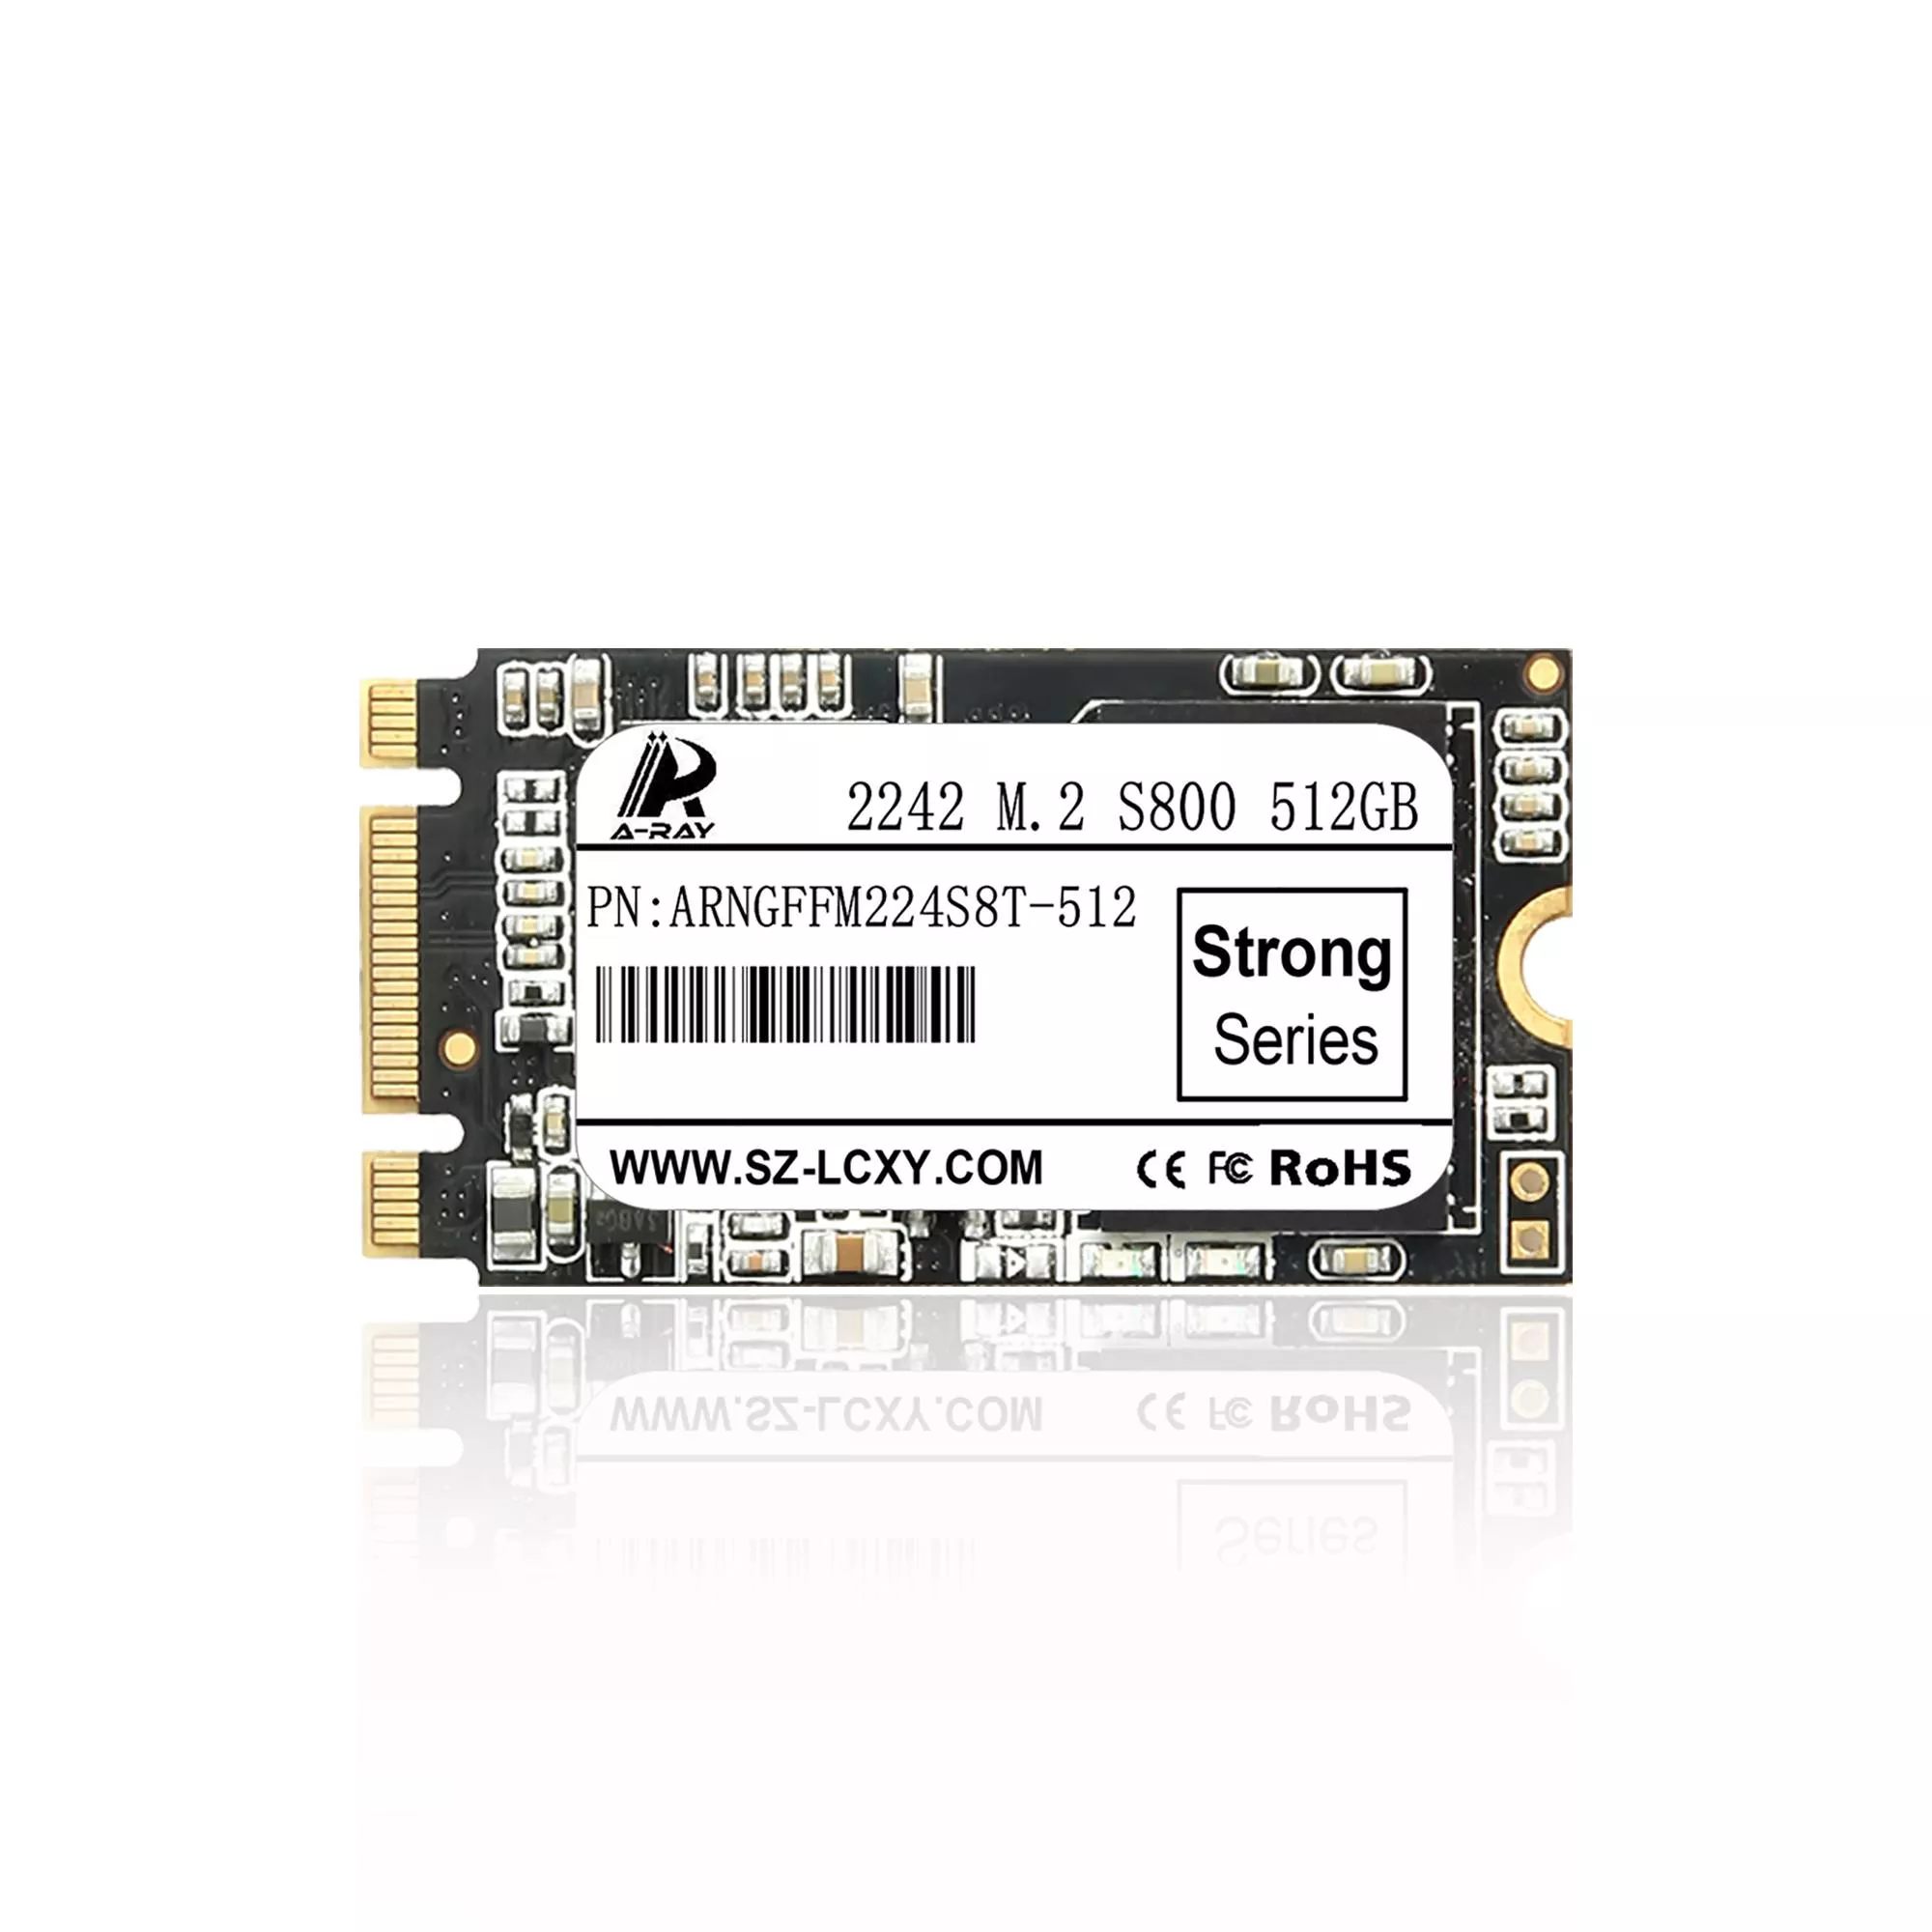 Ổ cứng SSD 512GB A-RAY 2242 NGFF M.2 6GBps S800 Strong Series